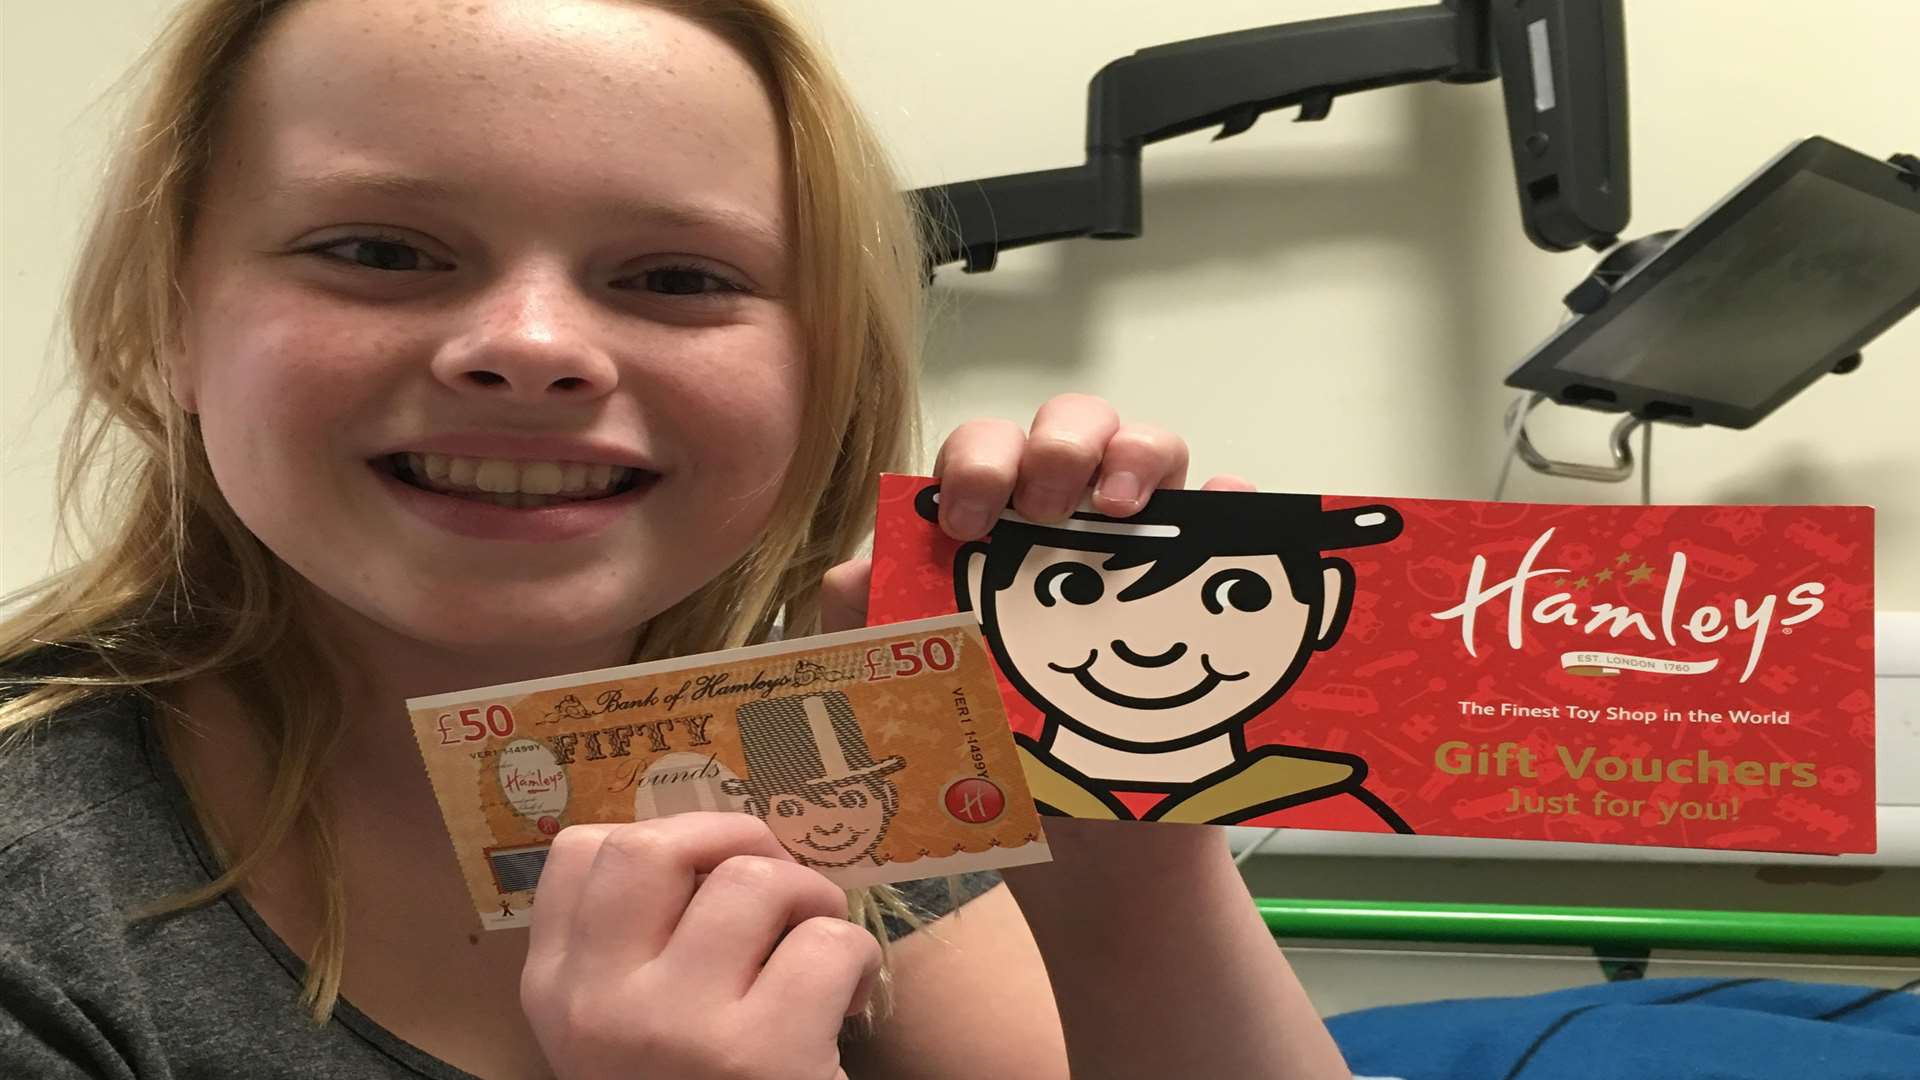 Jessica Marr-Henderson was also given a £50 voucher to spent in Hamleys